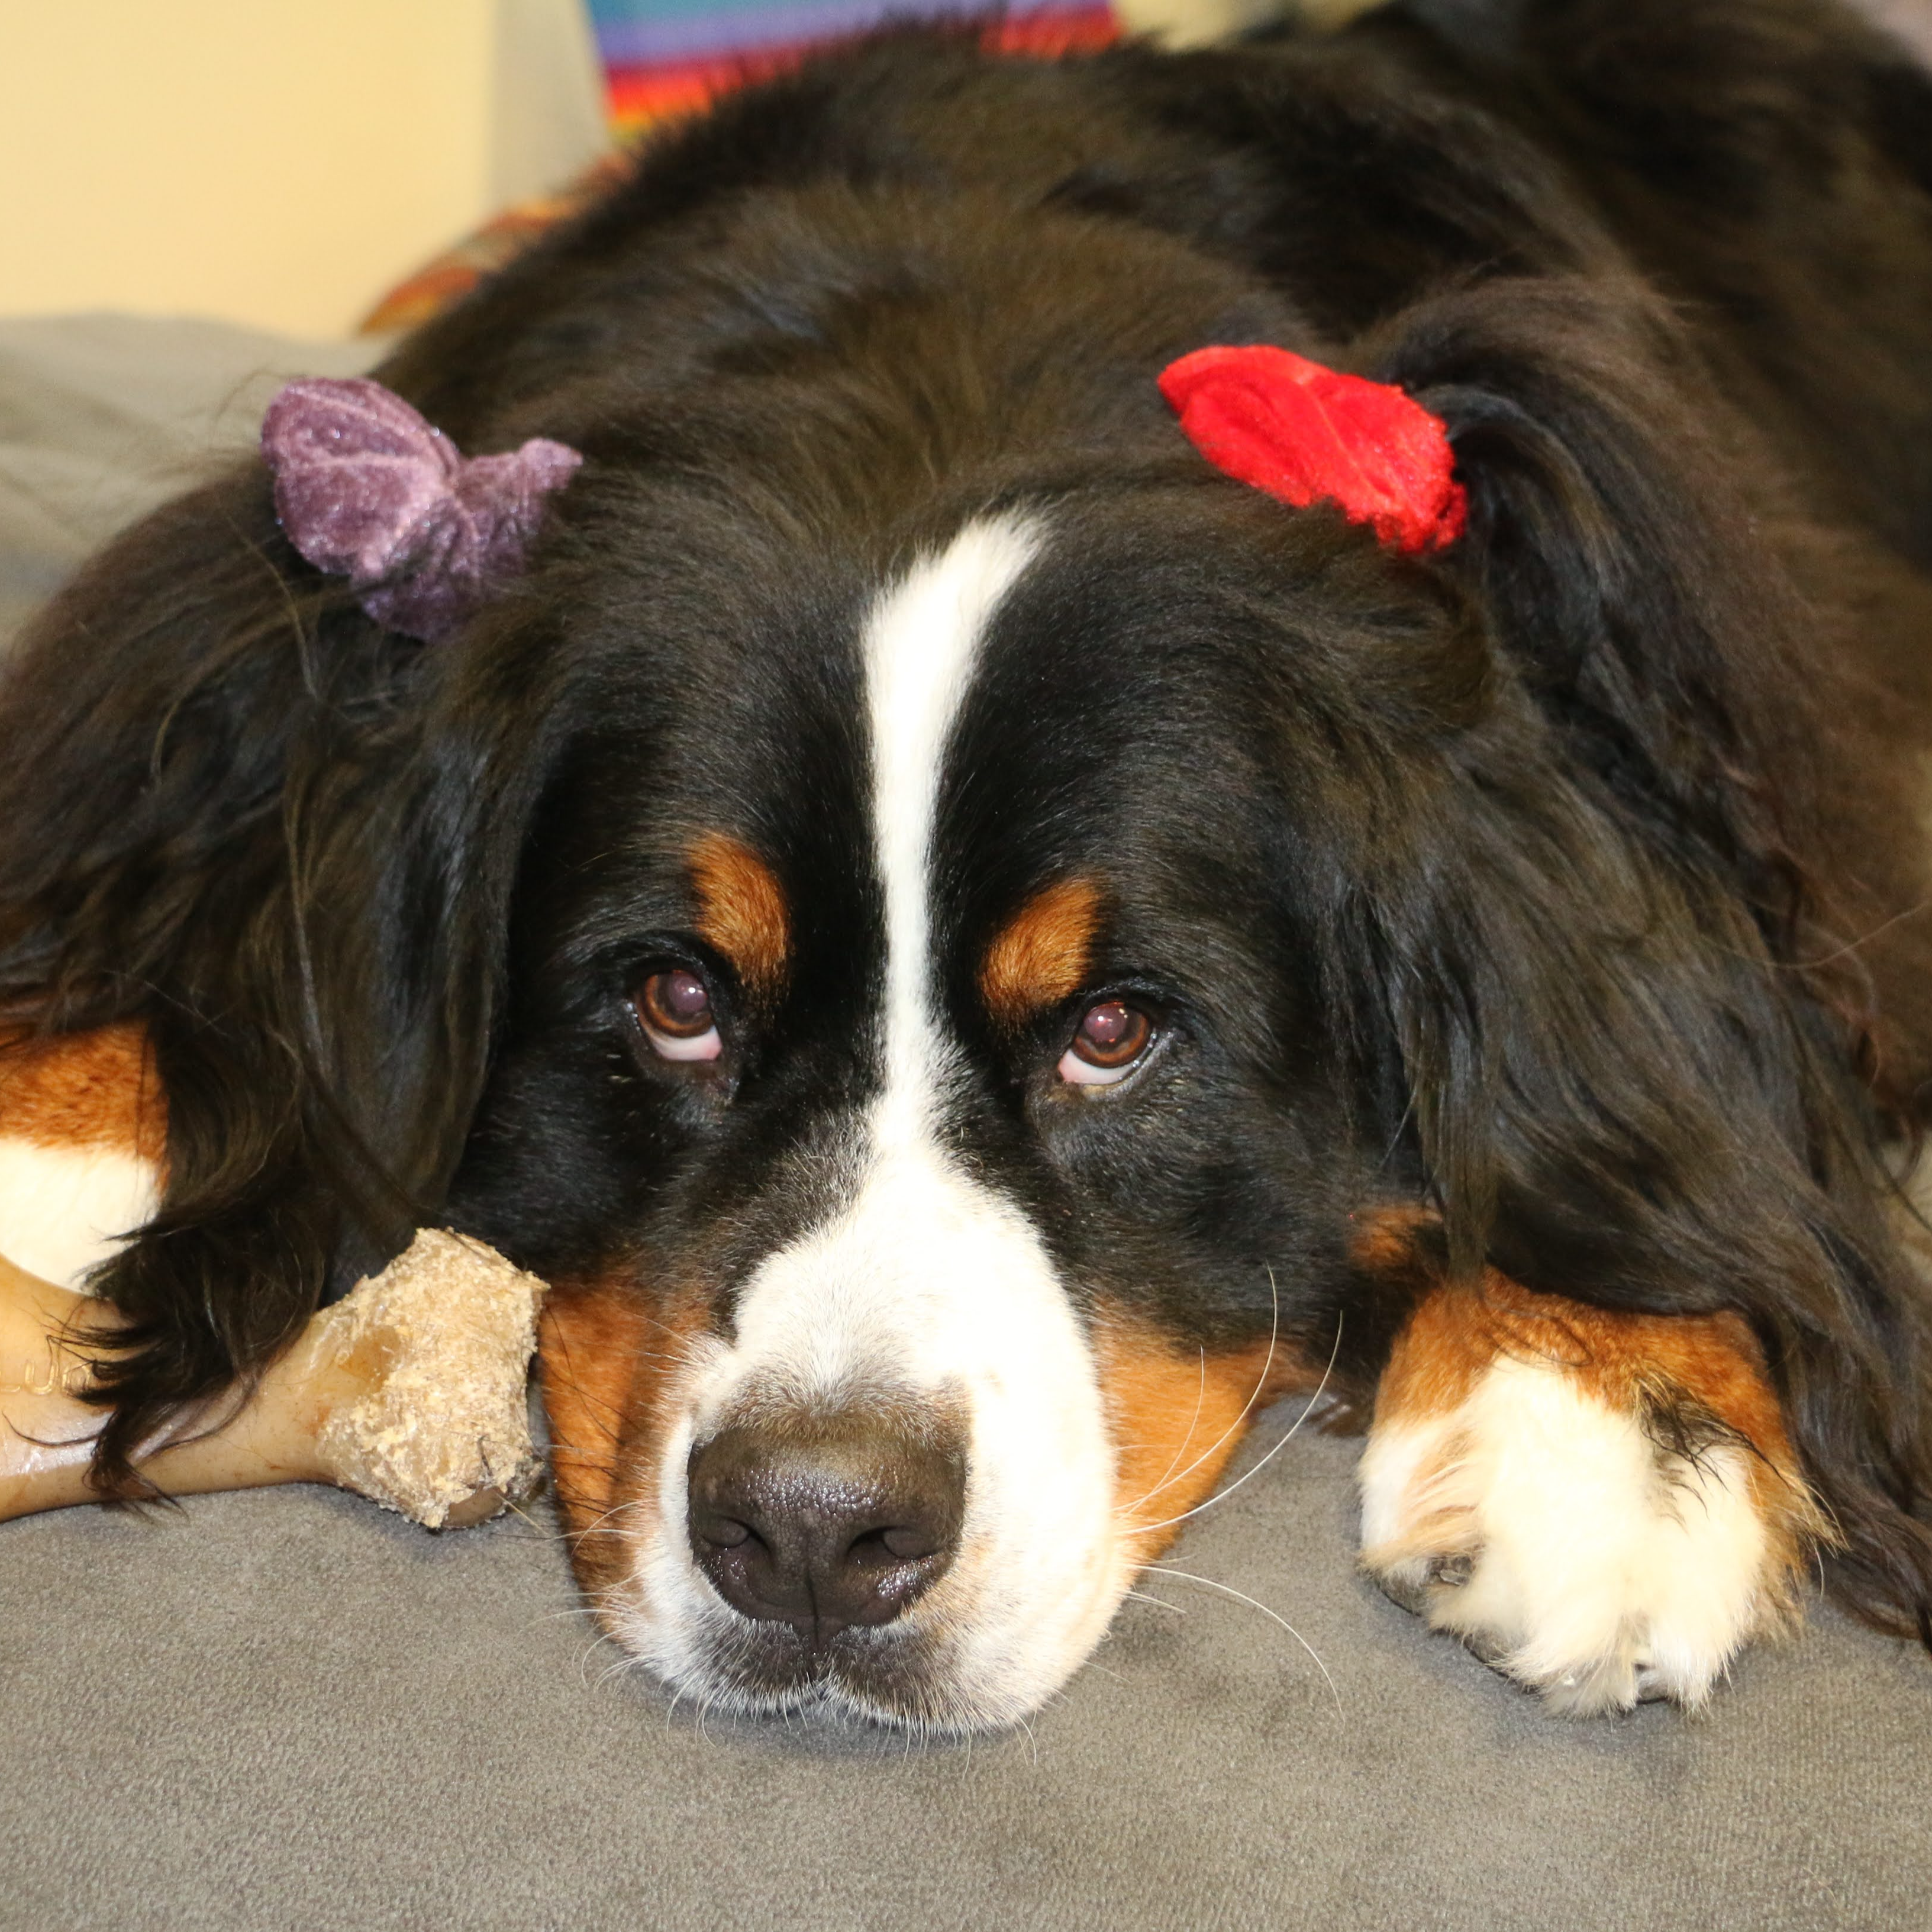 Radar, one of Muir's Bernese Mountain Dog therapy dogs, wears red and purple scrunchies.